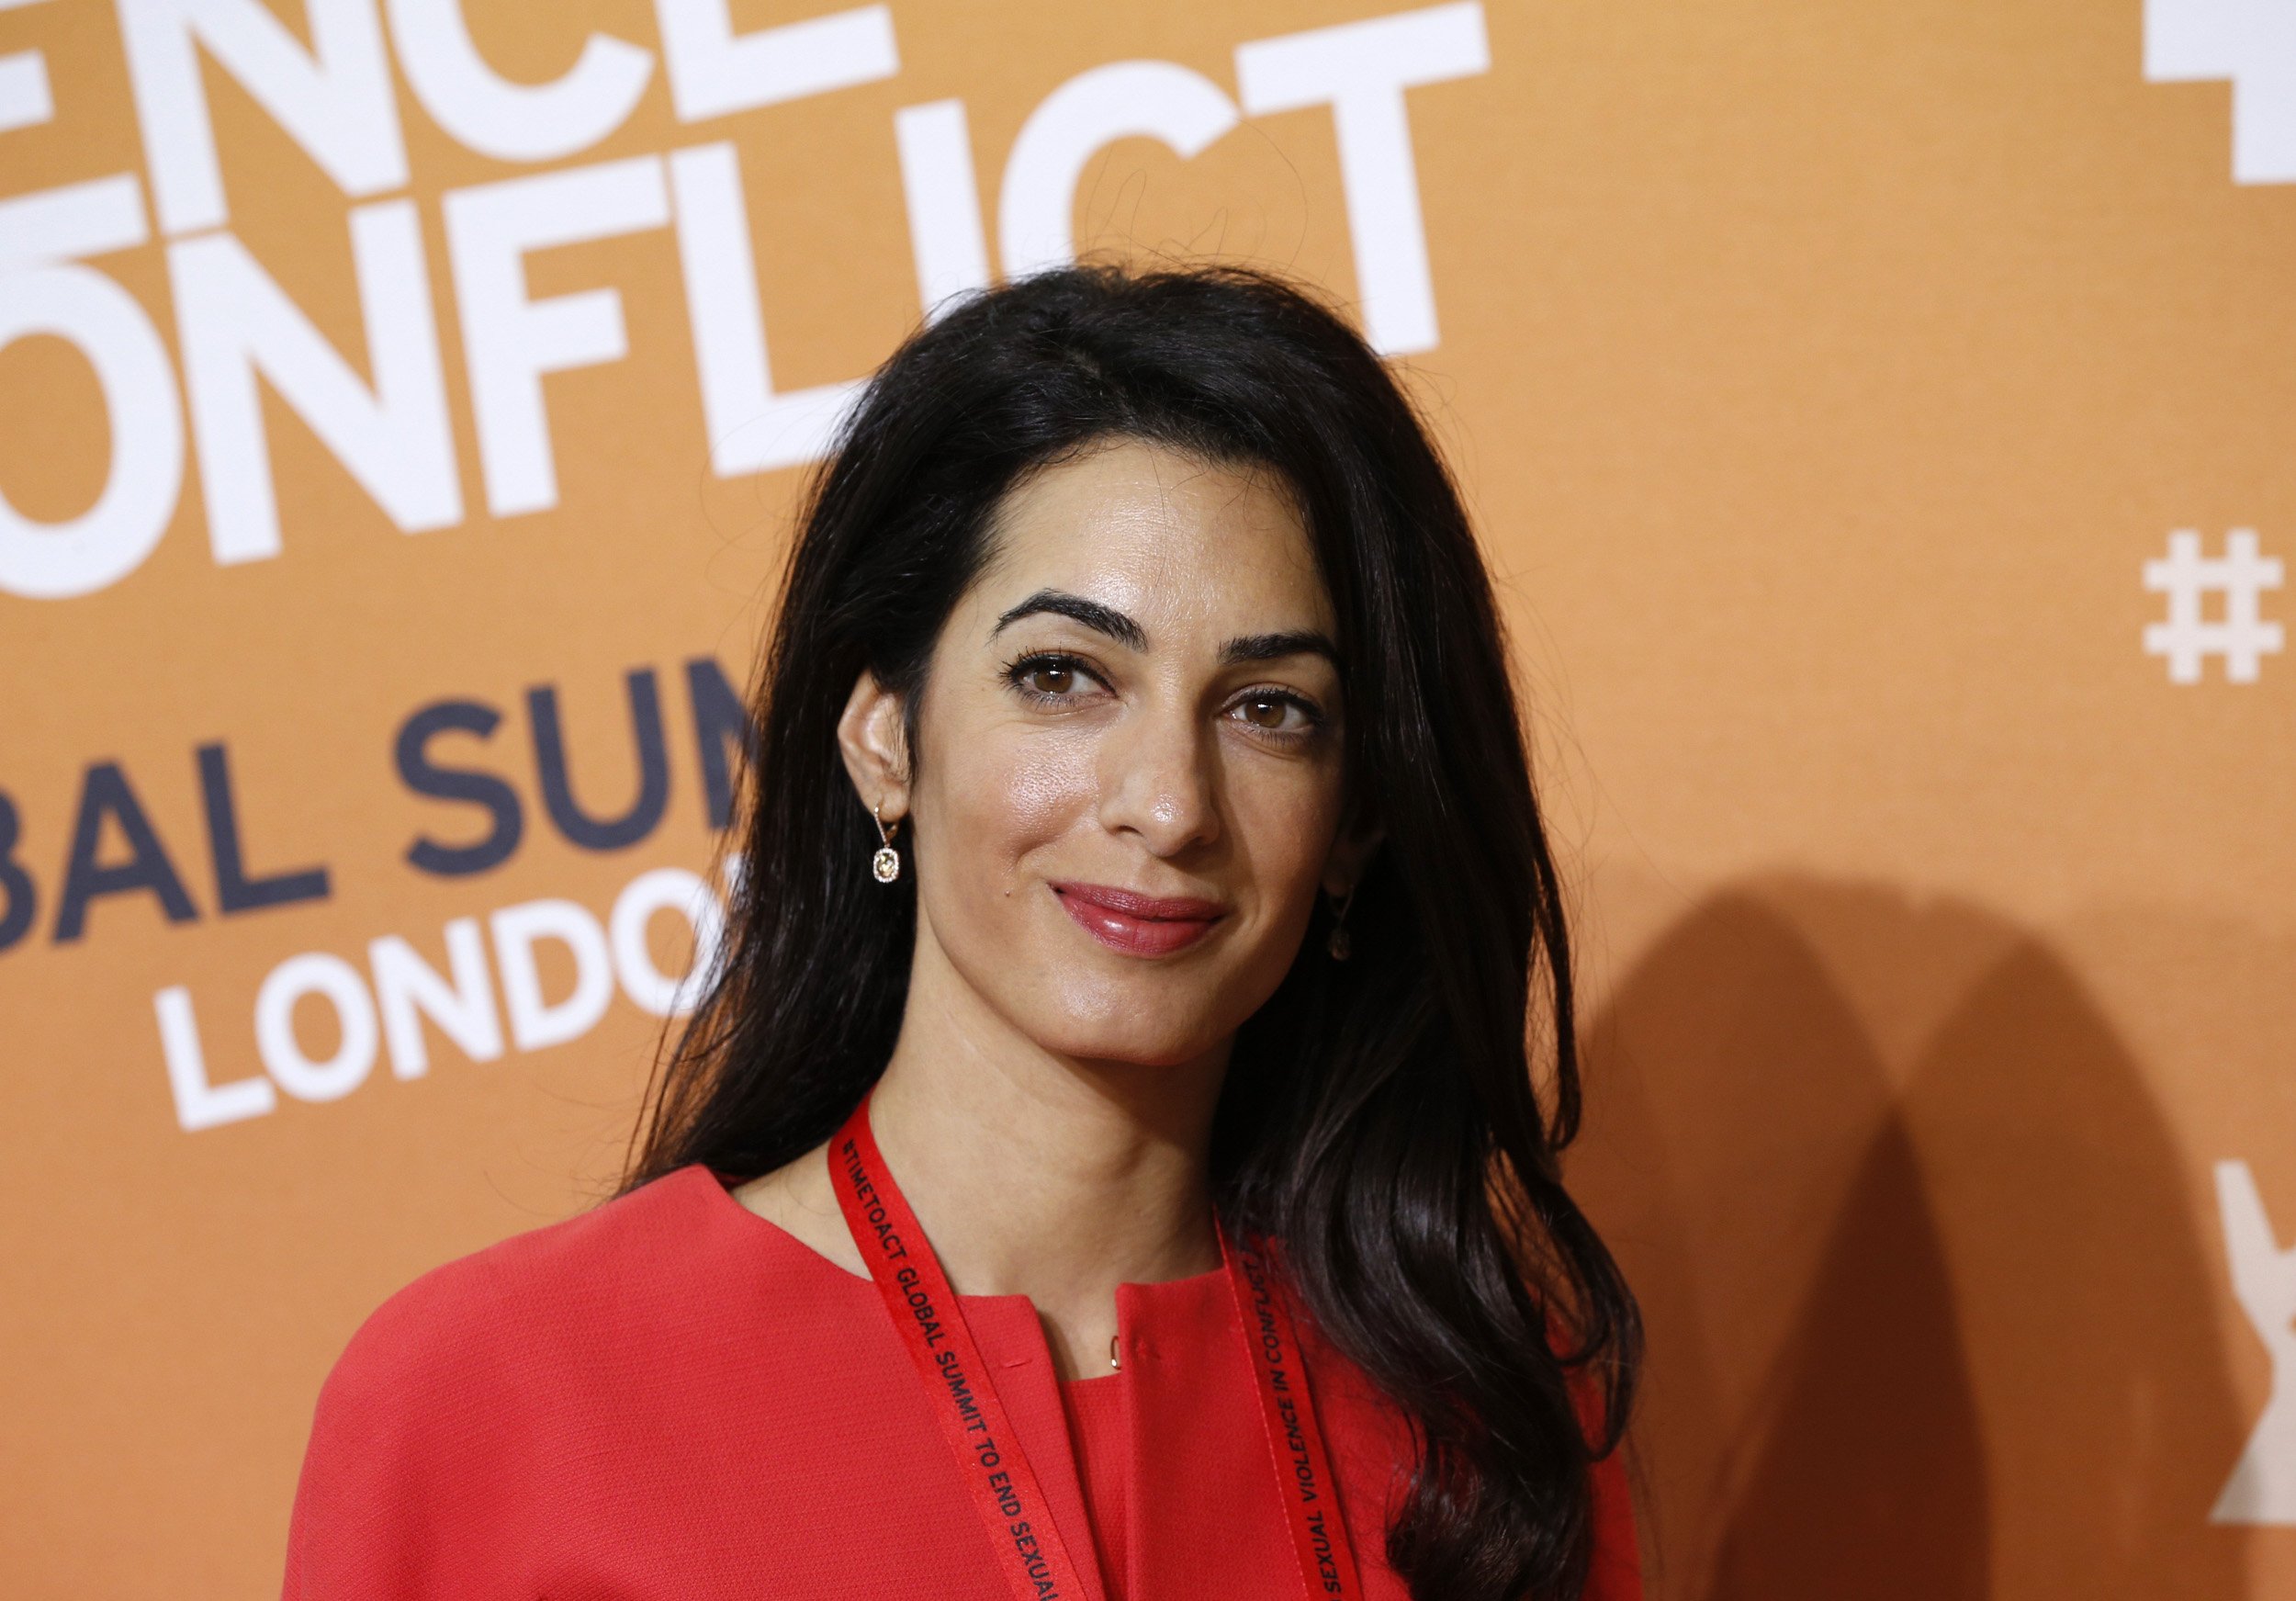 Human-rights lawyer Amal Alamuddin attends the End Sexual Violence in Conflict summit in London on June 12, 2014 (Lefteris Pitarakis—AP)